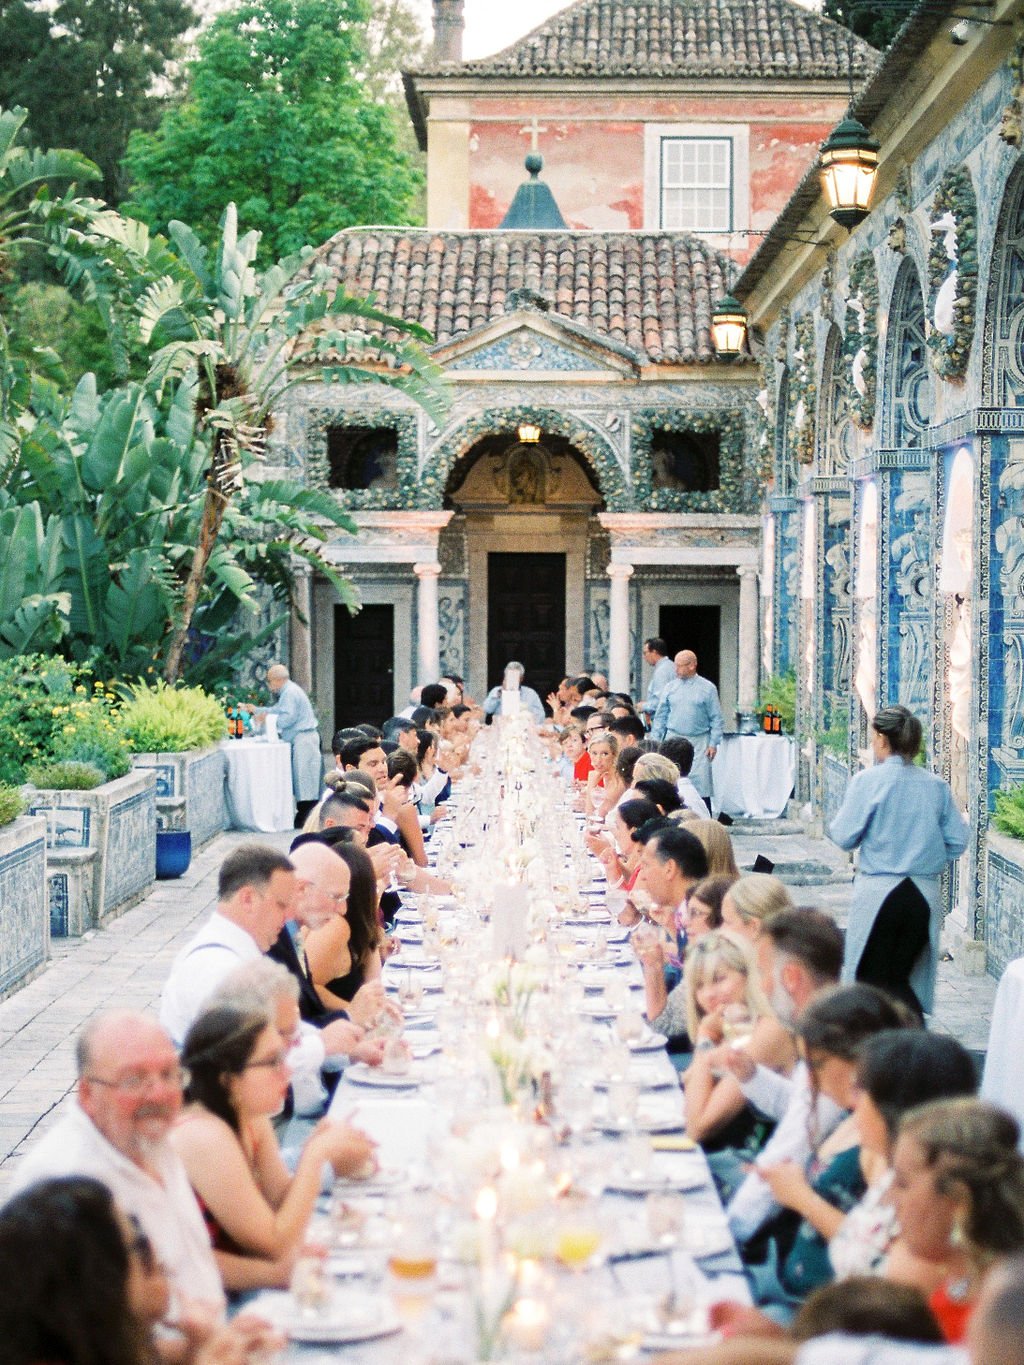 A long, beautifully set table in the terrace of  the Marqueses de Fronteira Palace in Lisbon with Portuguese tiles as backdrop, while the guests are chatting and eating